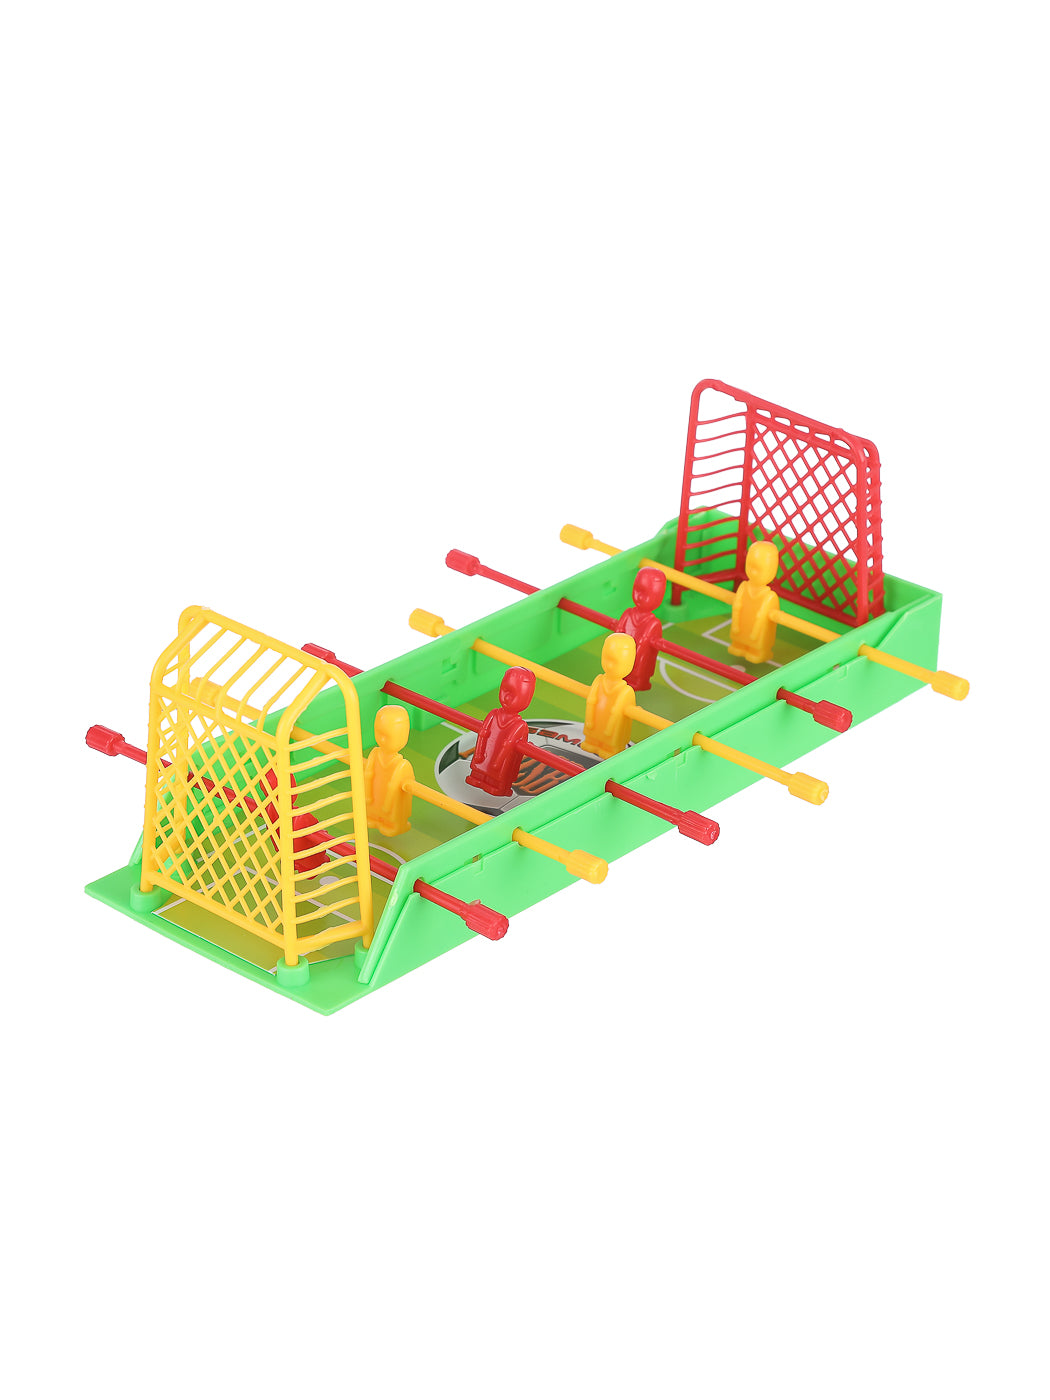 MINISO TABLE GAME(SOCCER) 2010623913104 EDUCATIONAL TOYS